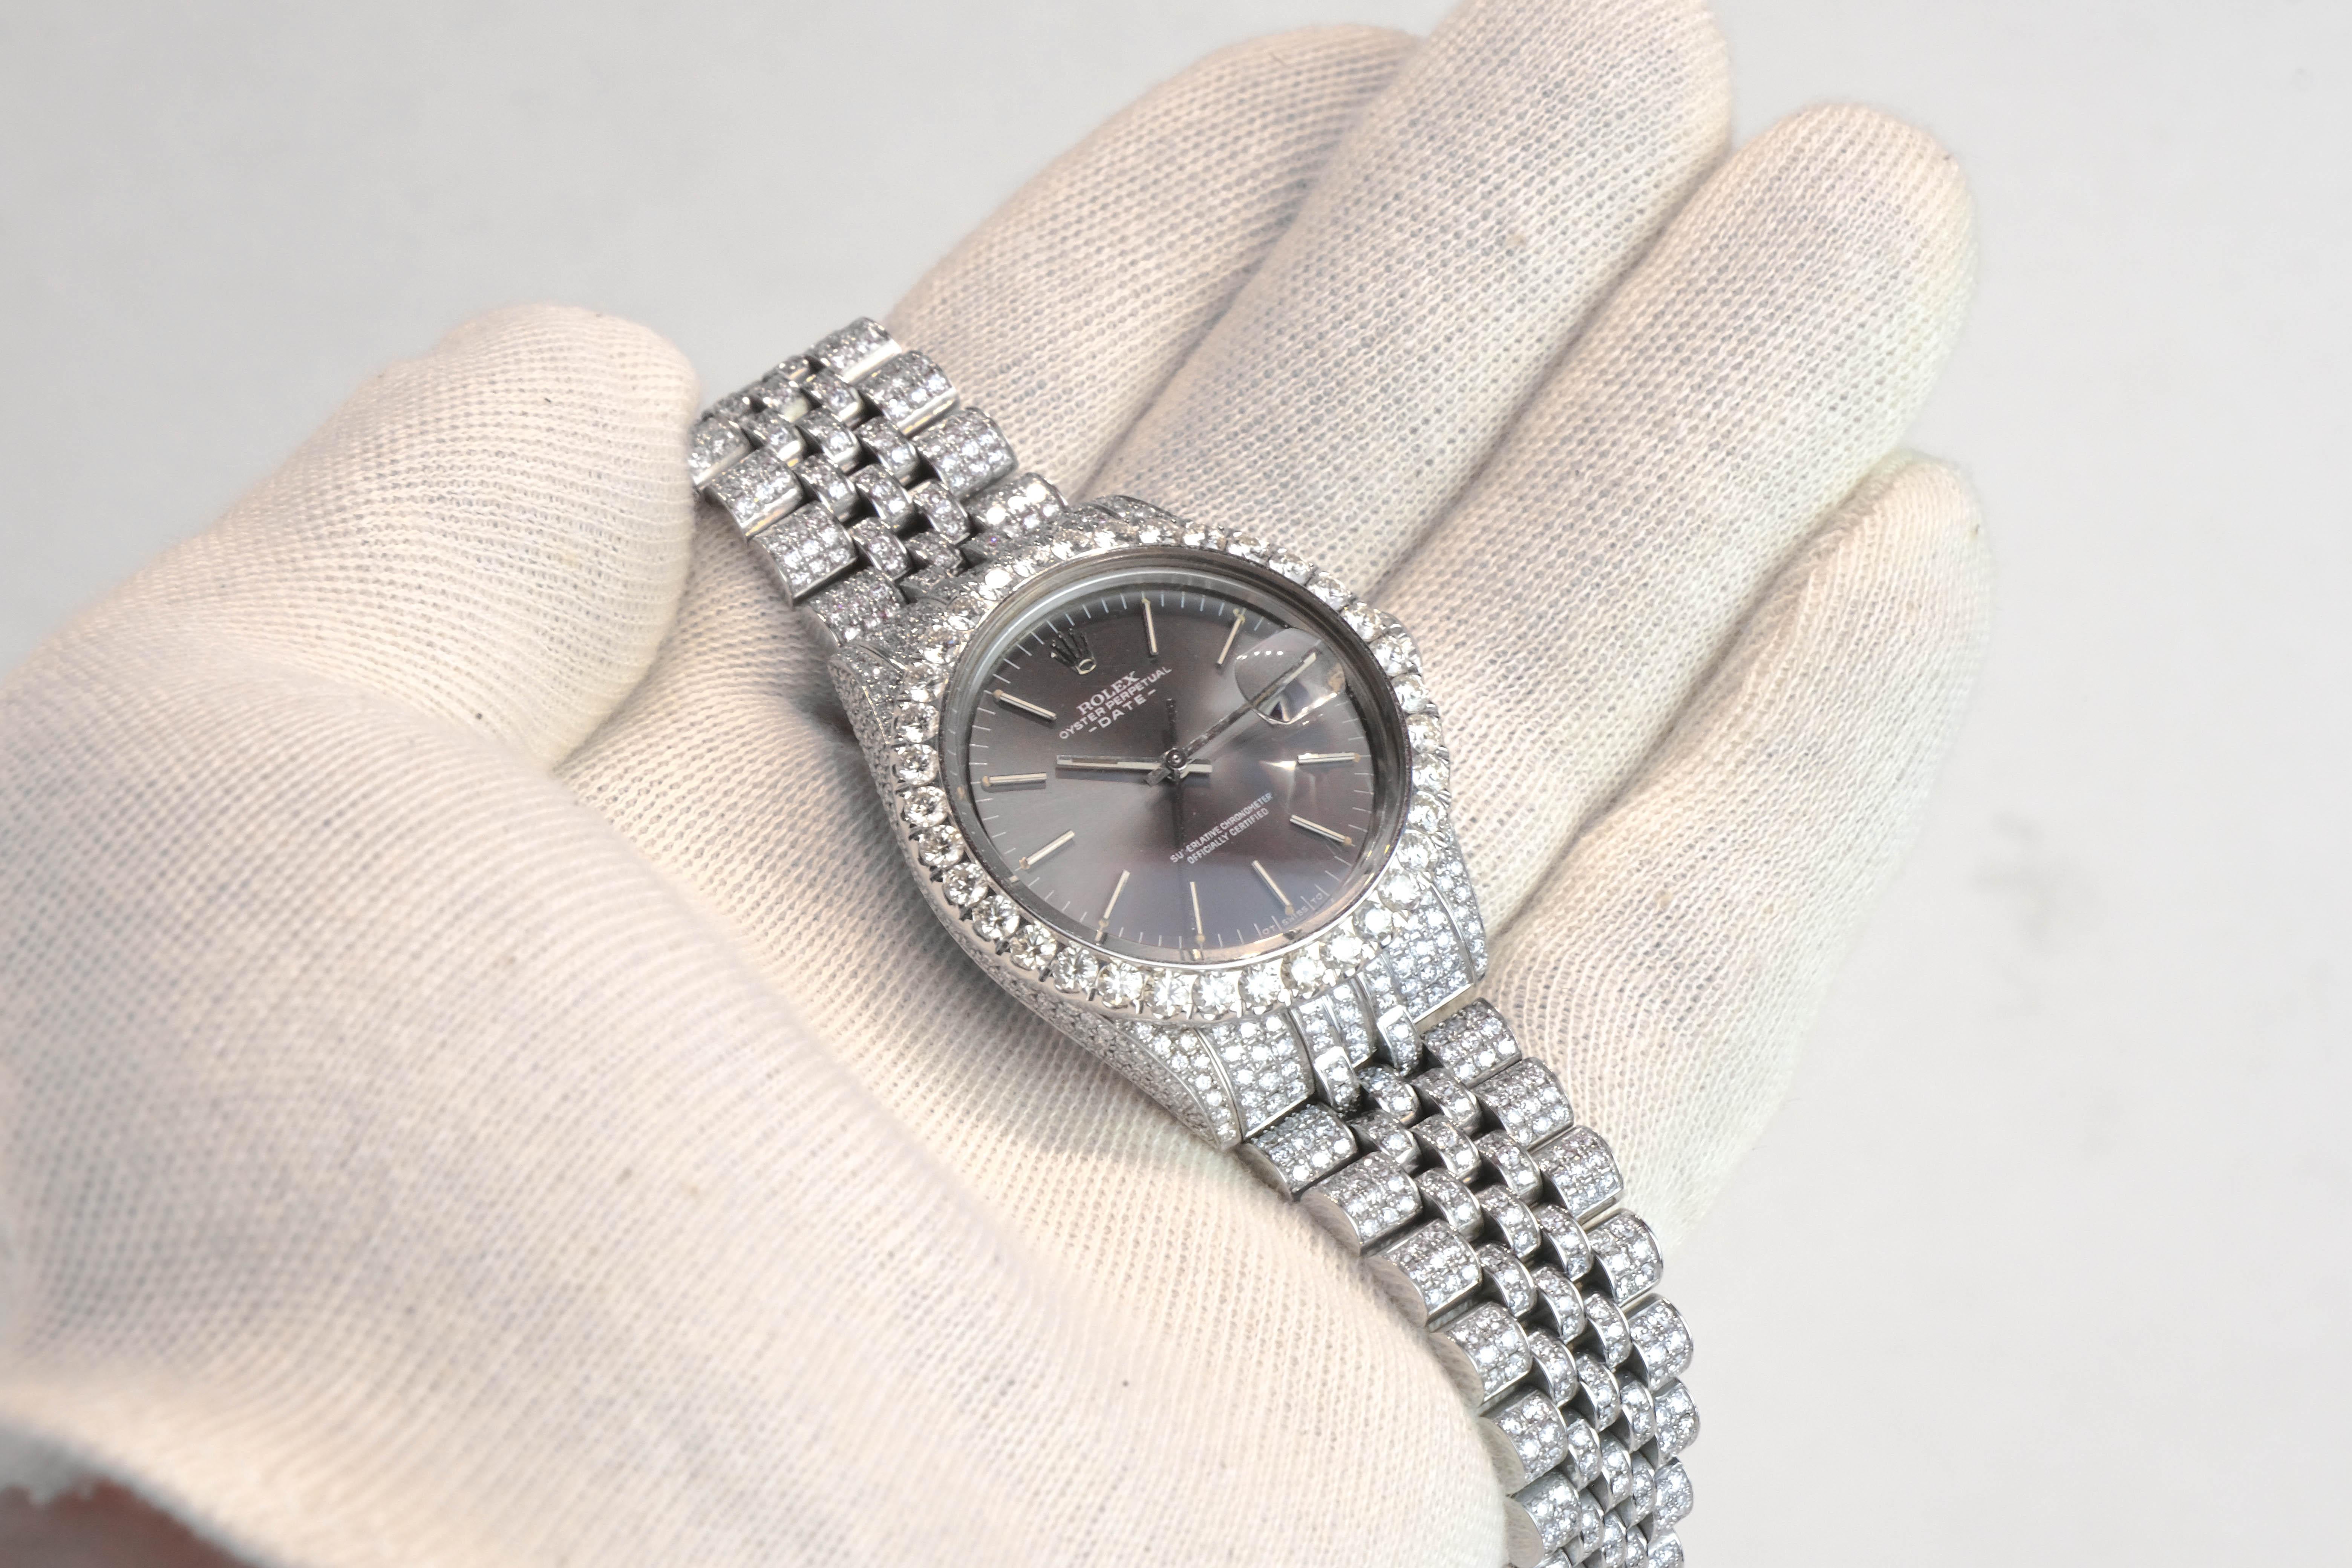 One gent's stainless steel Rolex Date Oyster Perpetual wristwatch. With a gray dial and date. It has been modified with round brilliant cut diamonds set throughout the bezel, lugs, sides and jubilee band measuring (approx. by gauge) 1.00mm-3.00mm,